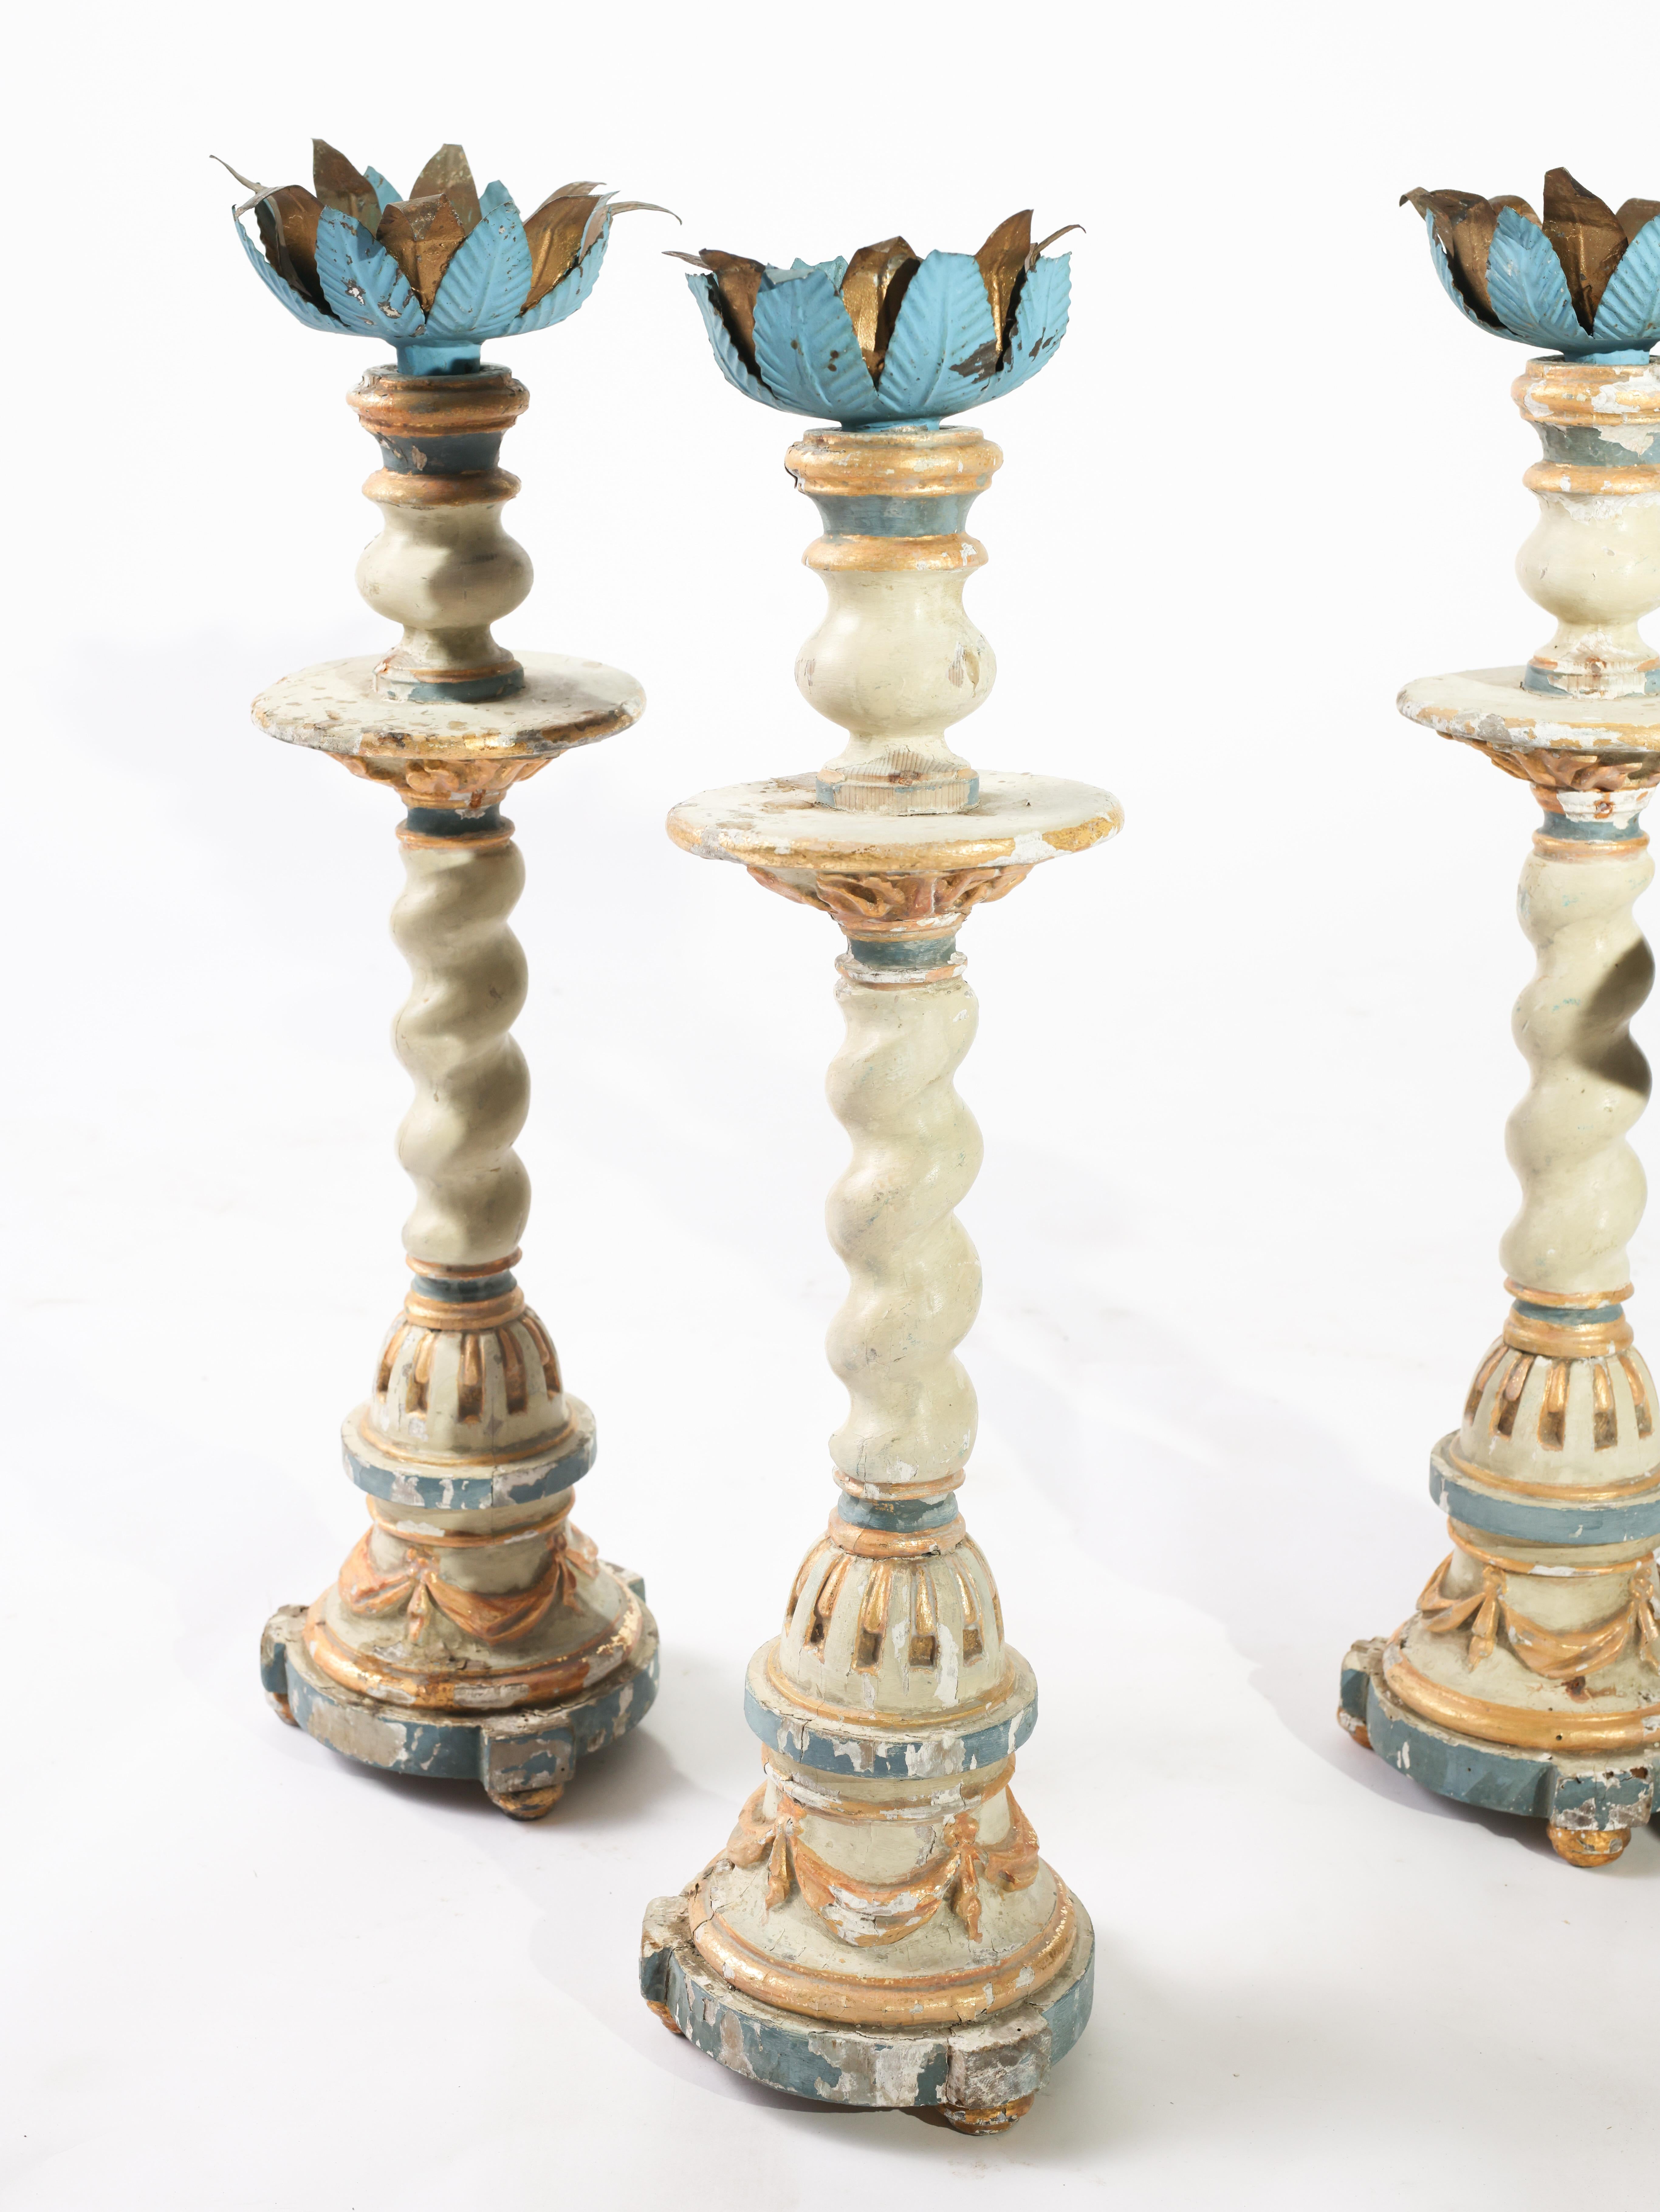 Set of four stunning 17th century Portuguese altar sticks. The candlestick tops are adorned in a crown of metal leaves in gilded and blue painted finishes. The large scale candlestick bases are carved with intricate detail with a painted and gilded